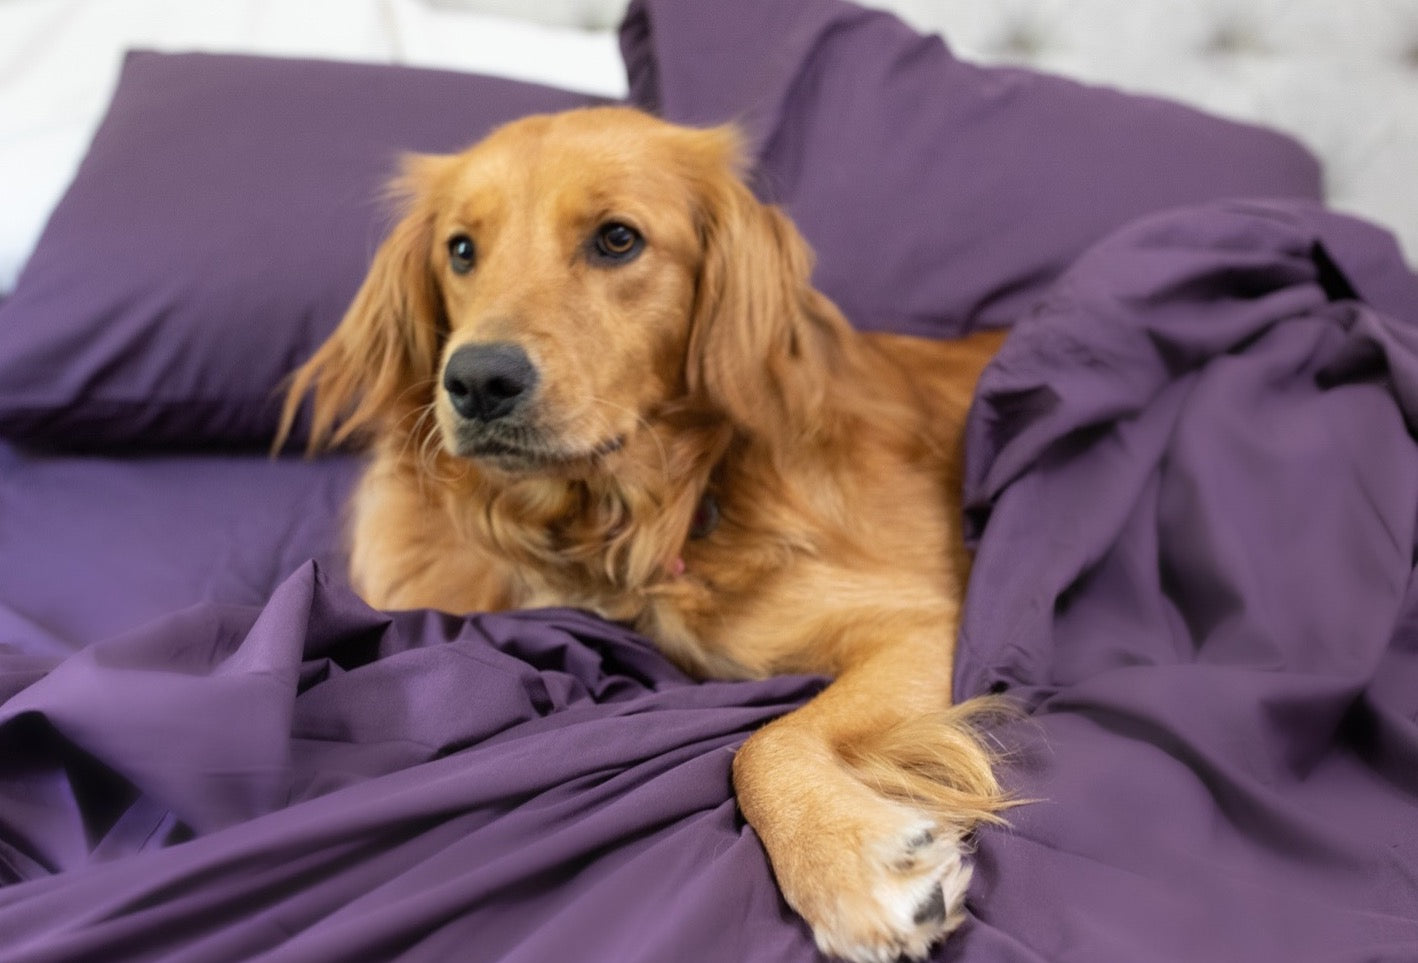 Why Have Purple Sheets in Your Bedroom?